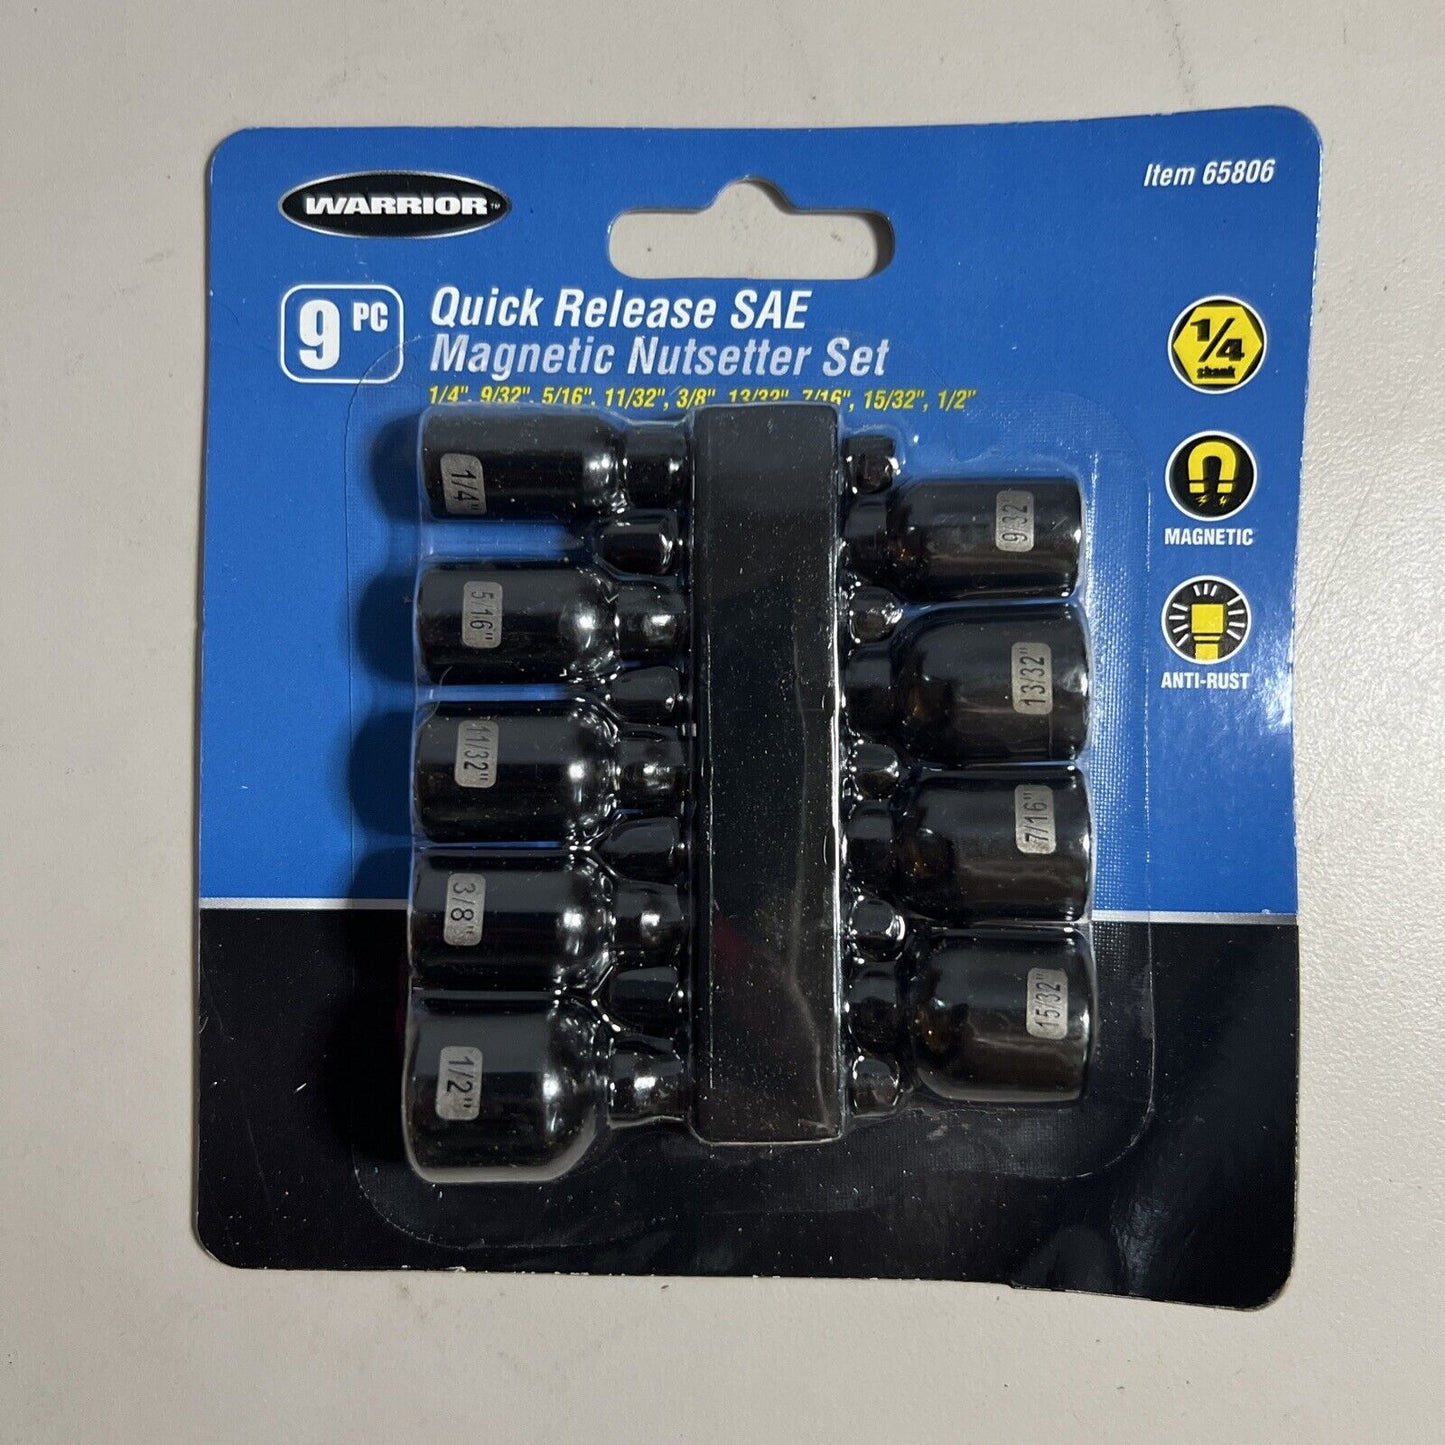 9 Pc. Quick Release Magnetic SAE Nut Setter Set